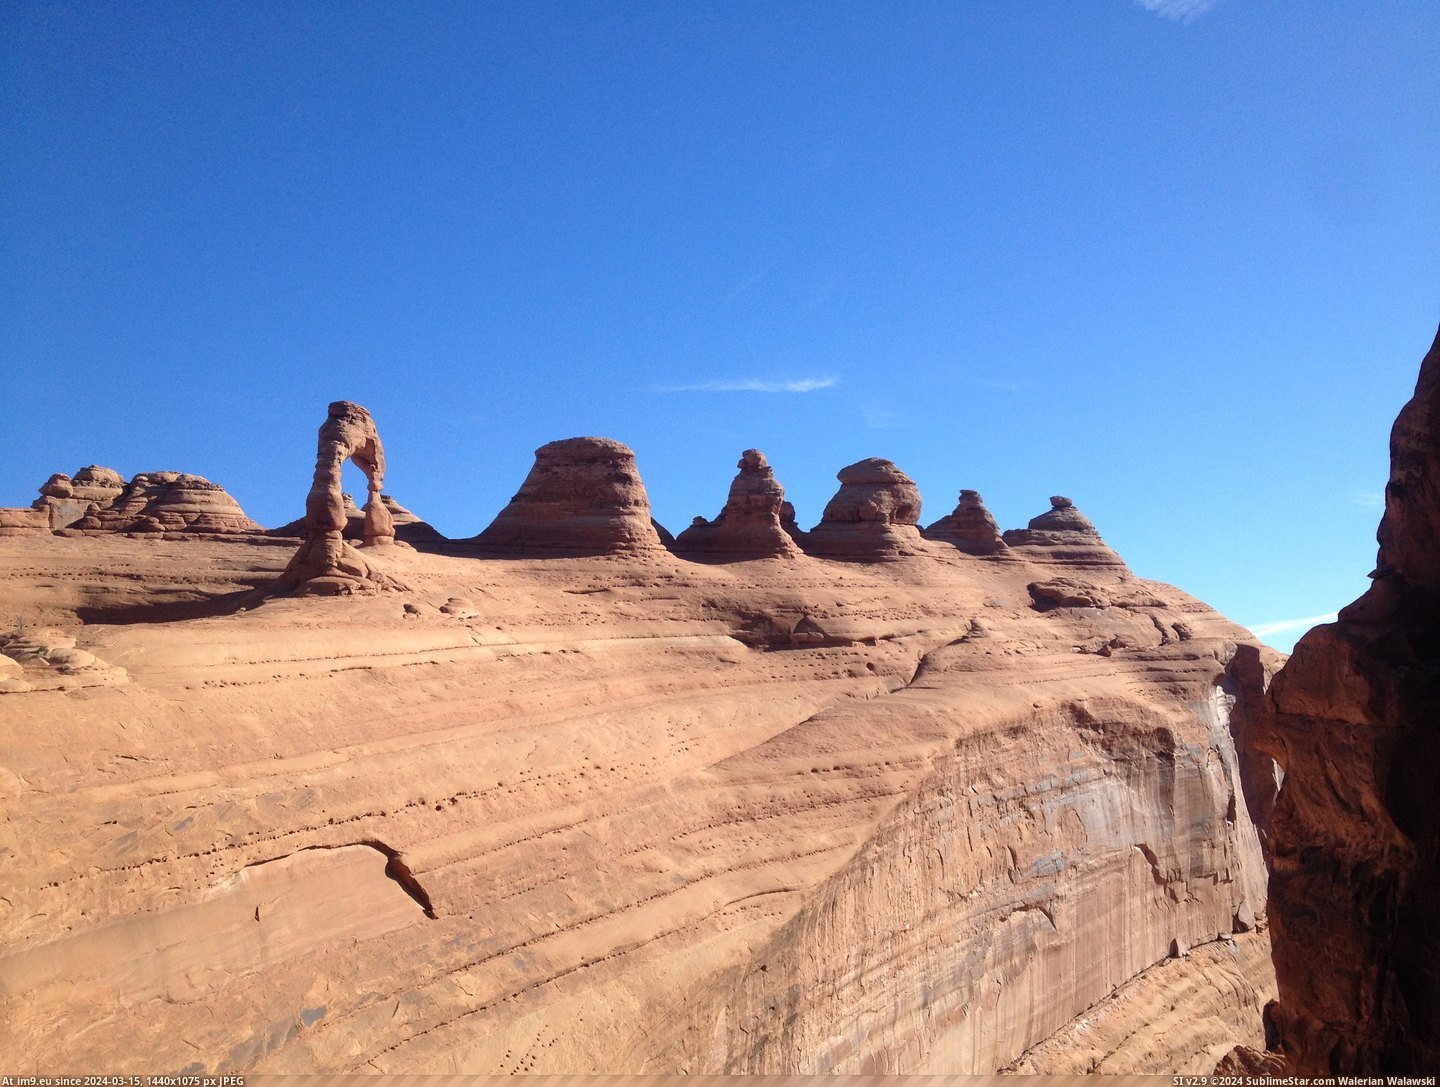 #Park #National #Arch #Delicate #Arches #3264x2448 #Utah [Earthporn] Delicate Arch at Arches National Park, Utah. [3264x2448] Pic. (Изображение из альбом My r/EARTHPORN favs))